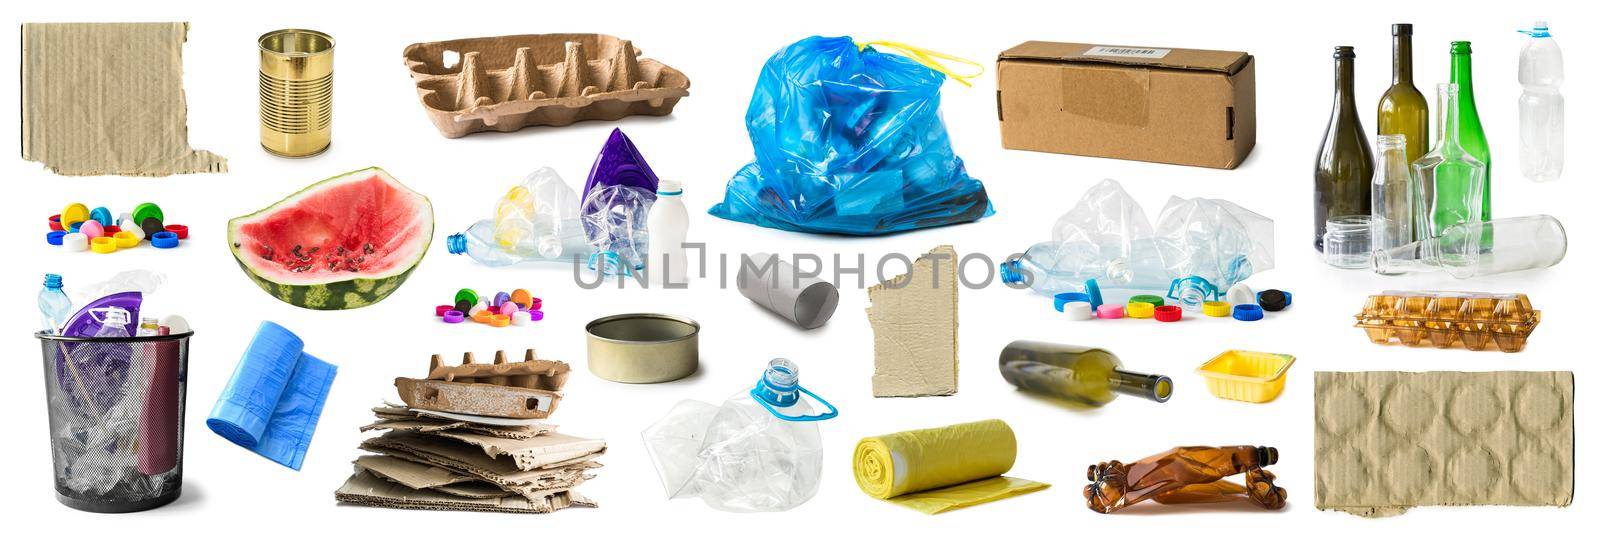 Sorted garbage collage with different types of trash isolated on white background. Set of recycled rubbish separated on groups